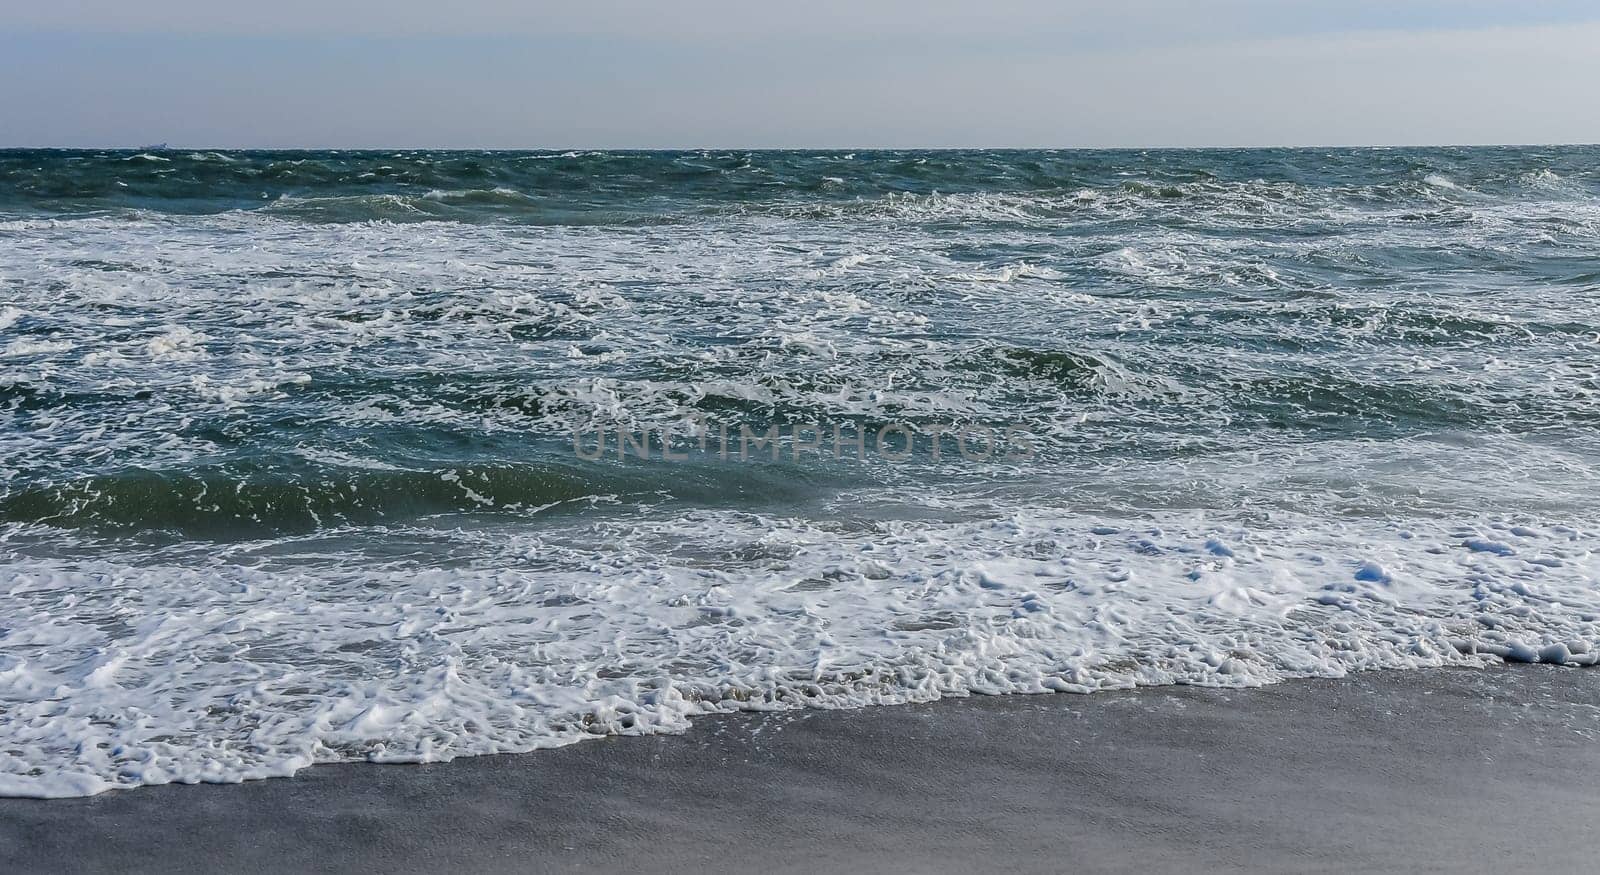 Stormy sea, waves and white foam on the surface, Black Sea